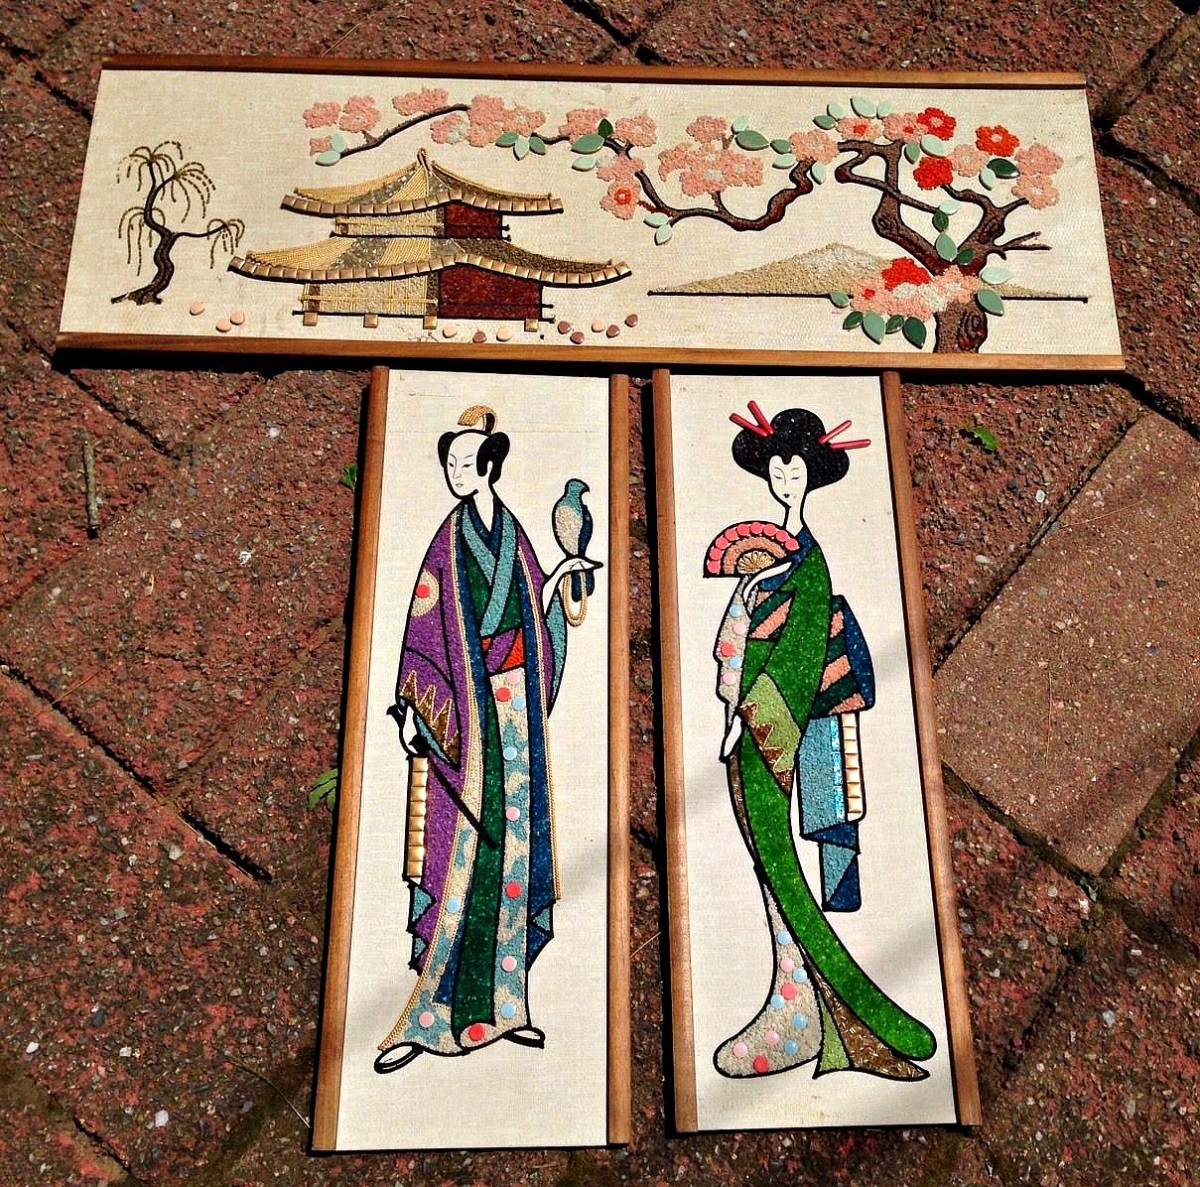 Three Piece Vintage Asian Gravel Art Set Mid Century Modern. The large one measures 36" x 12.5. Smaller ones measure 24" x 8.5. 